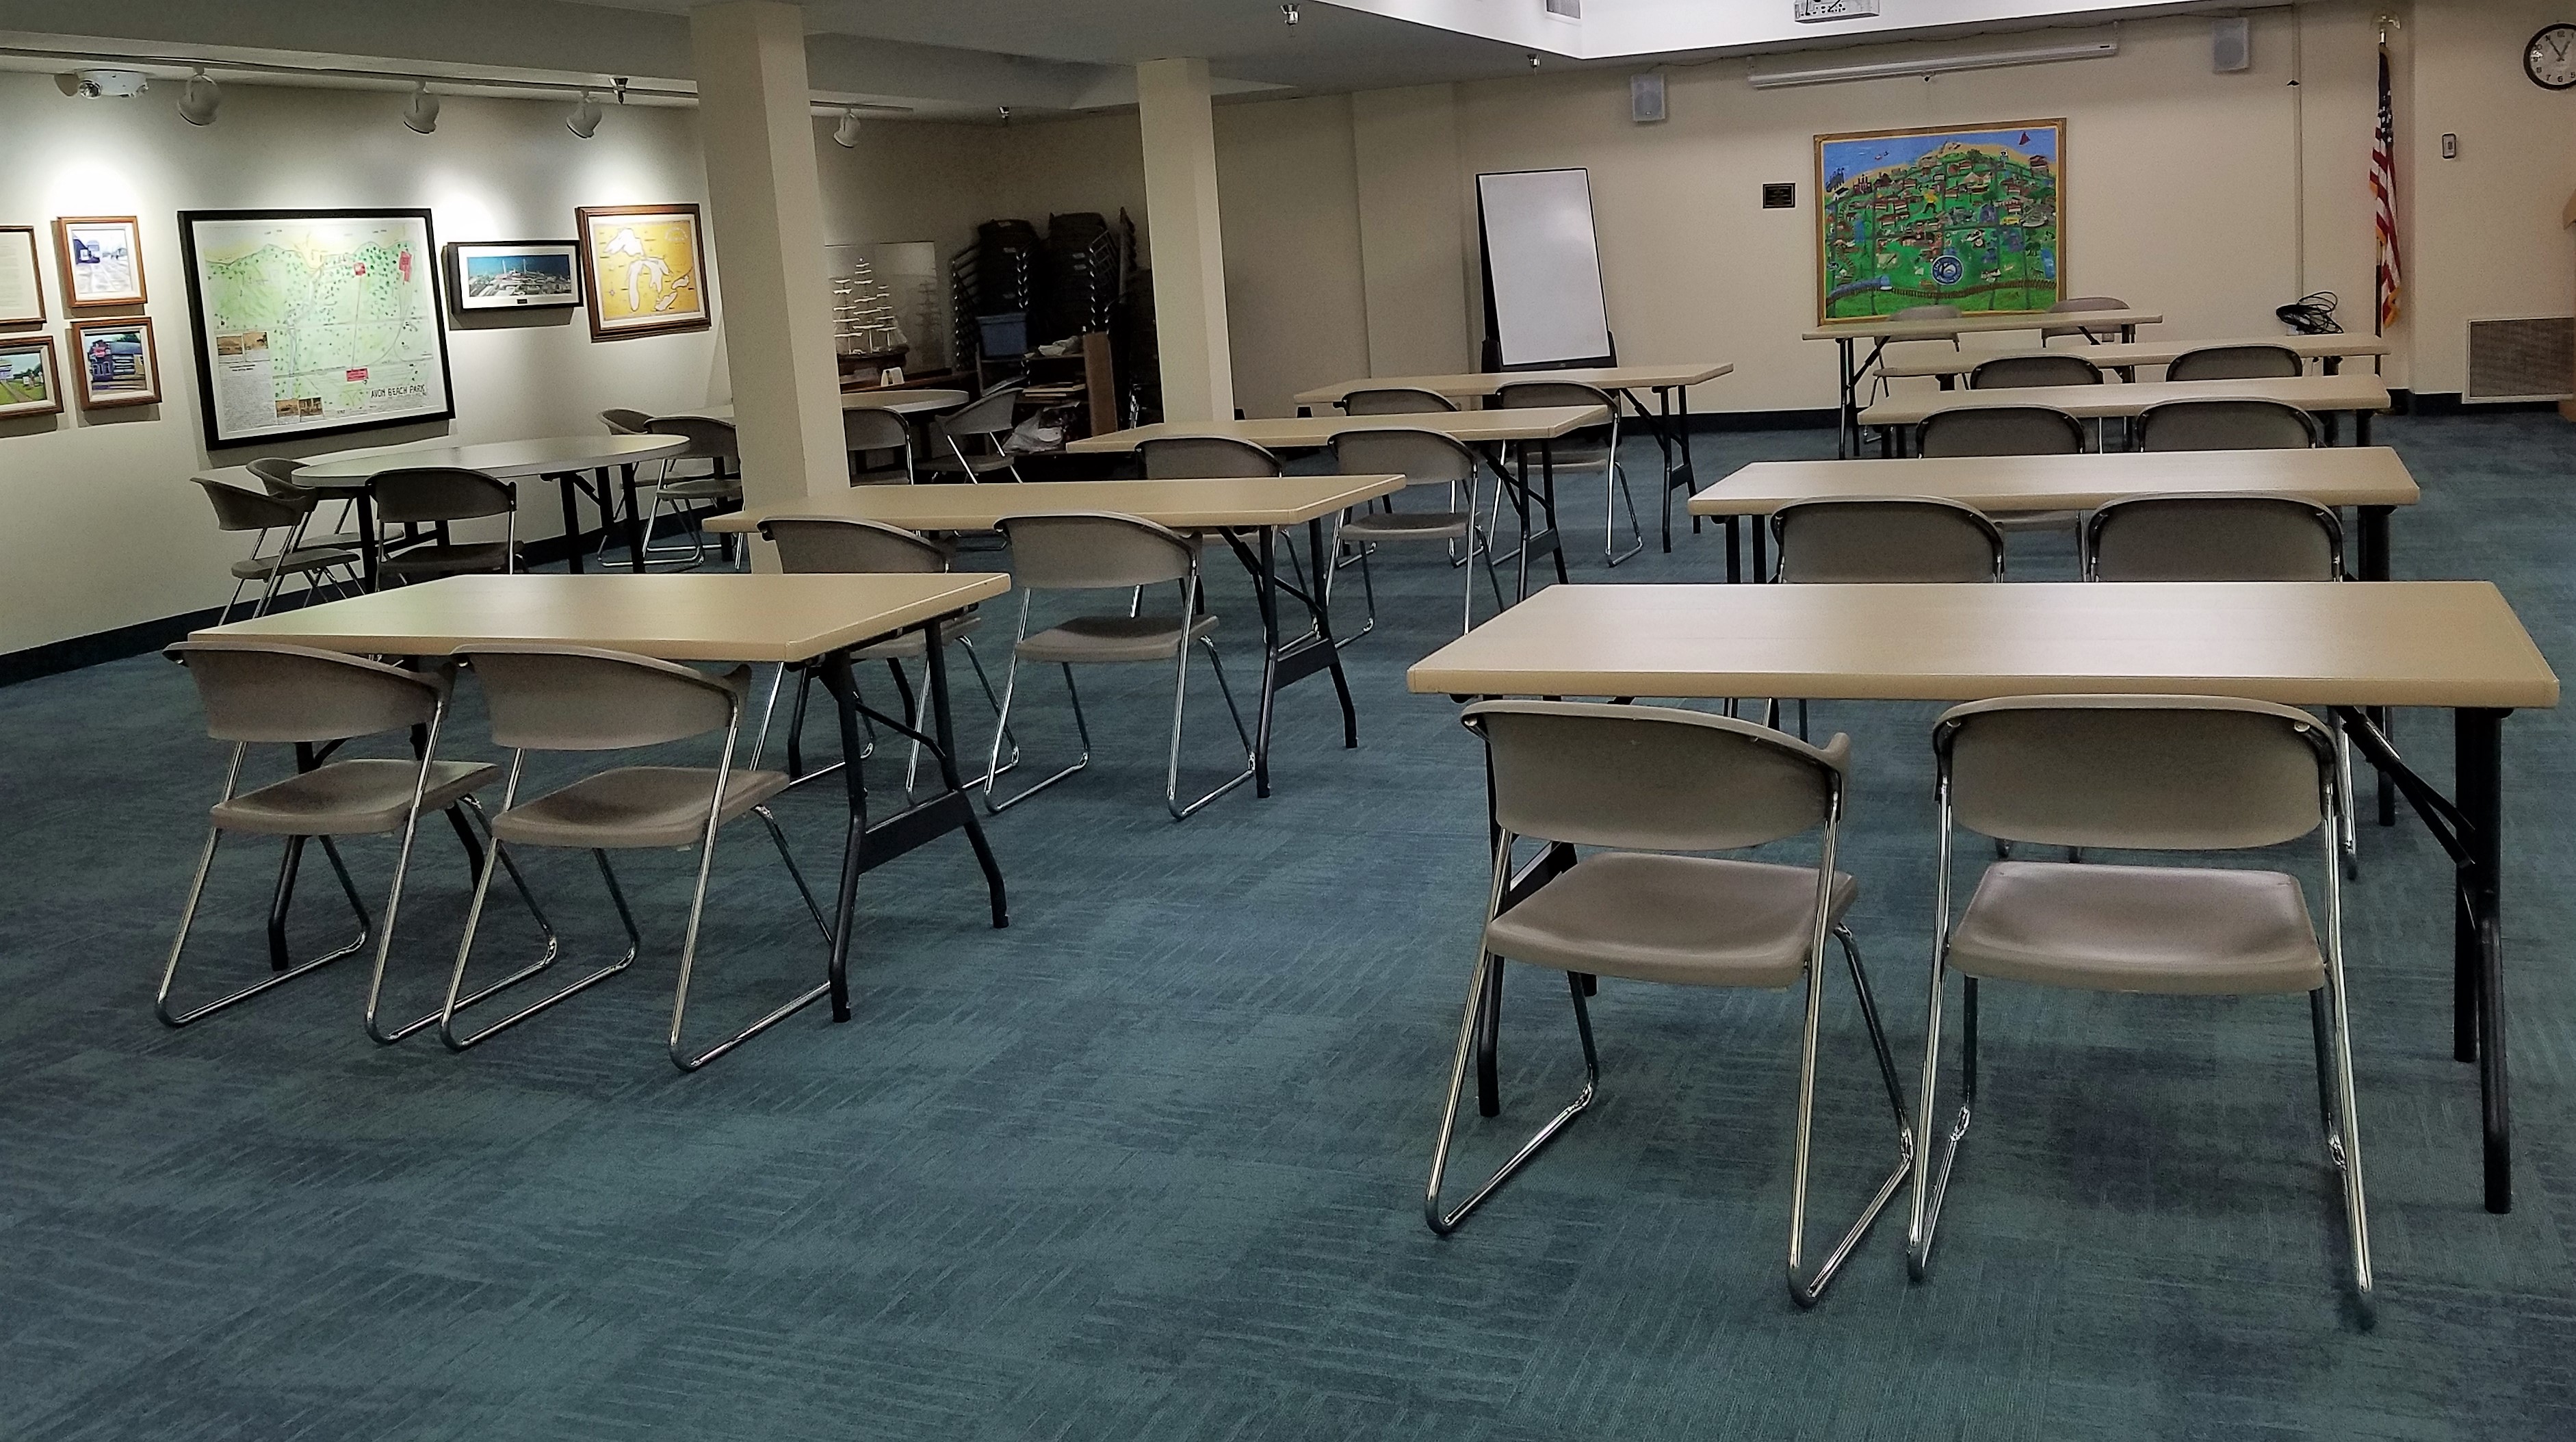 Room image showing a series of rectangular tables laid out classroom-style with circular tables to the left